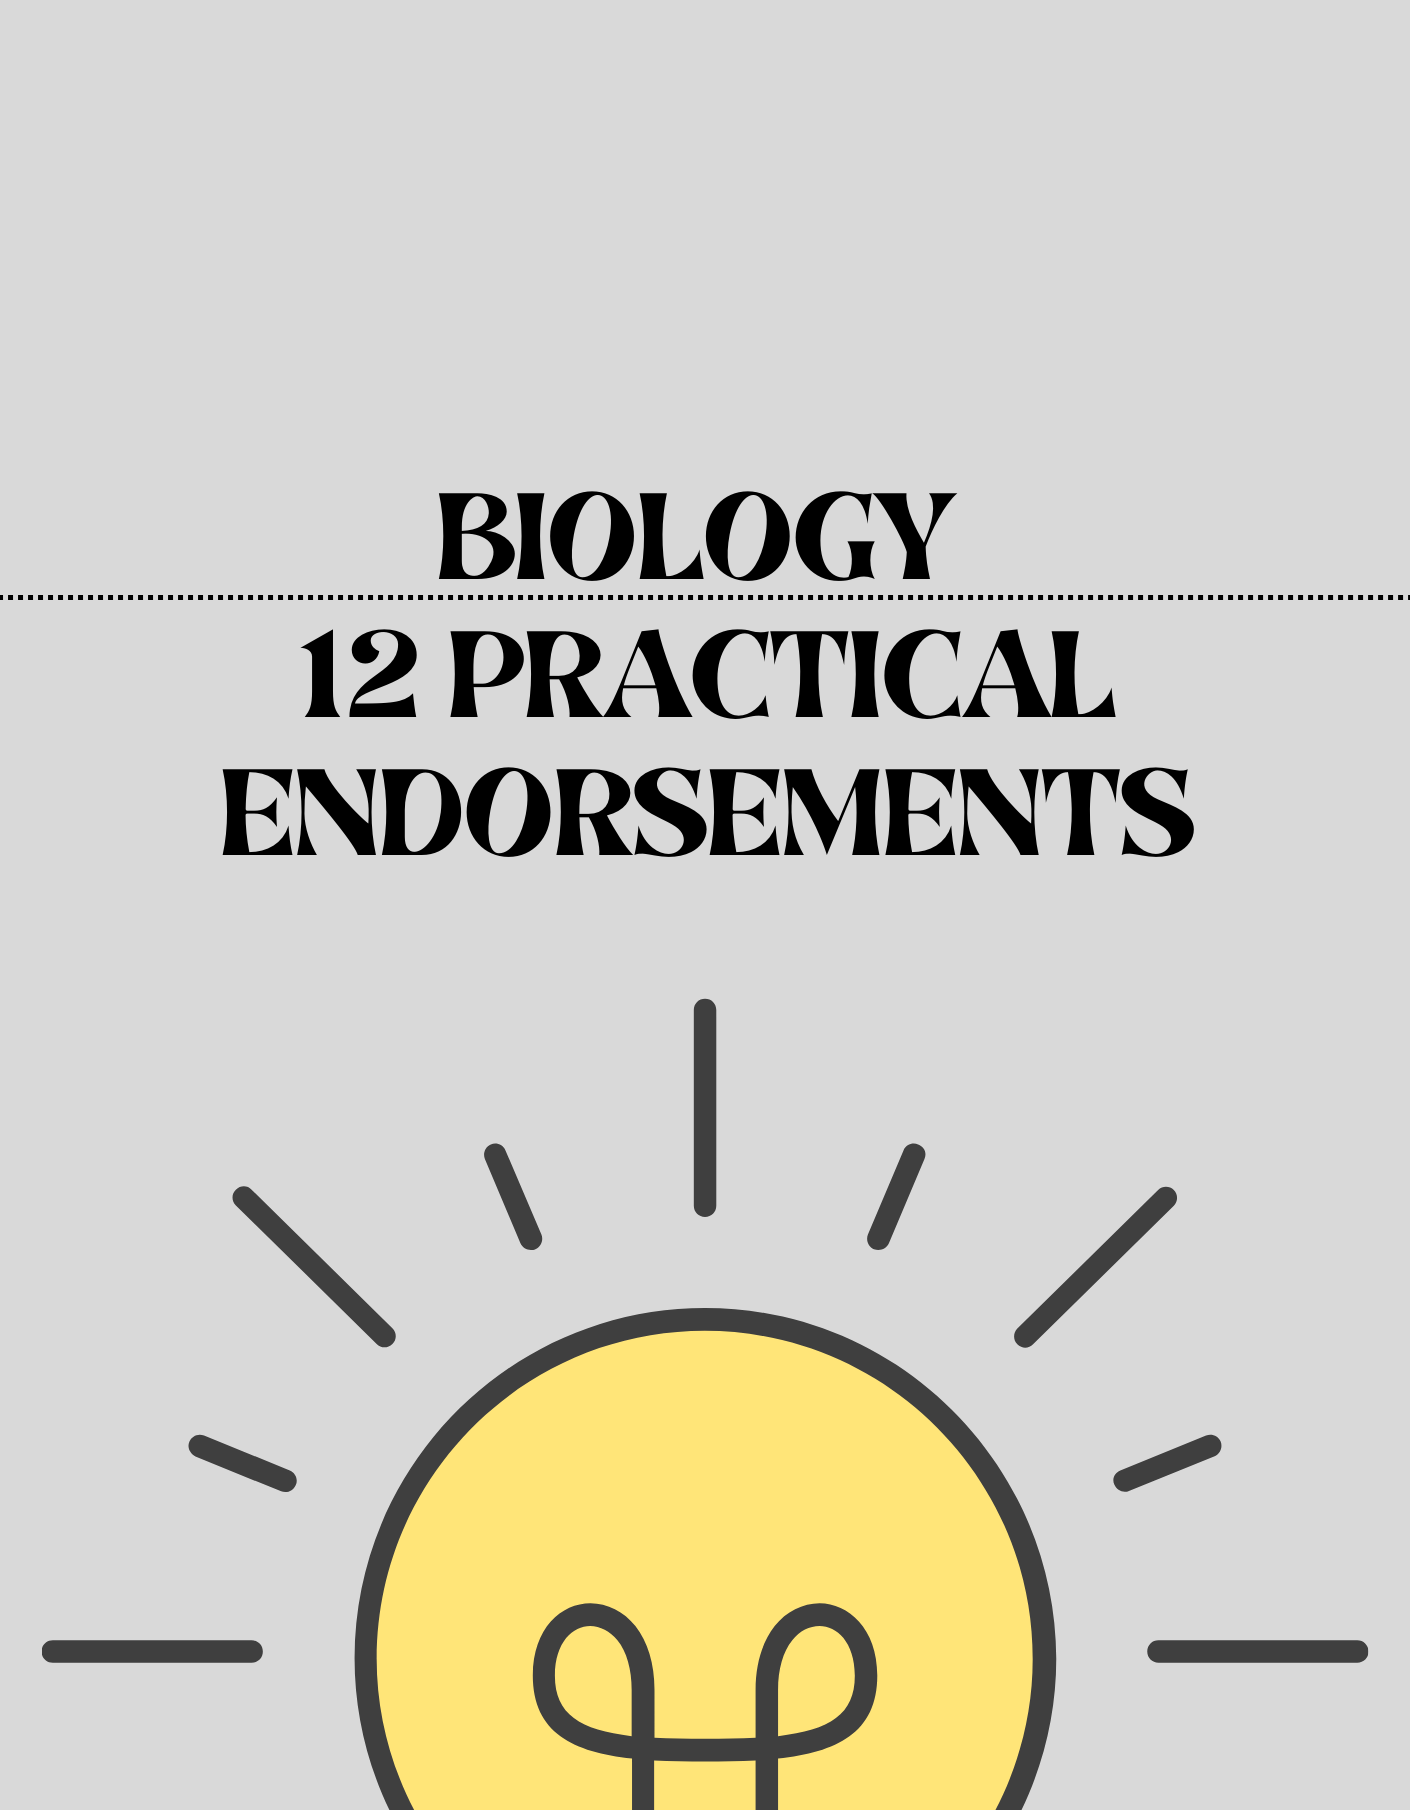 12 Practical Endorsements A Level Biology Without Examinations. - Exam Centre Birmingham Limited